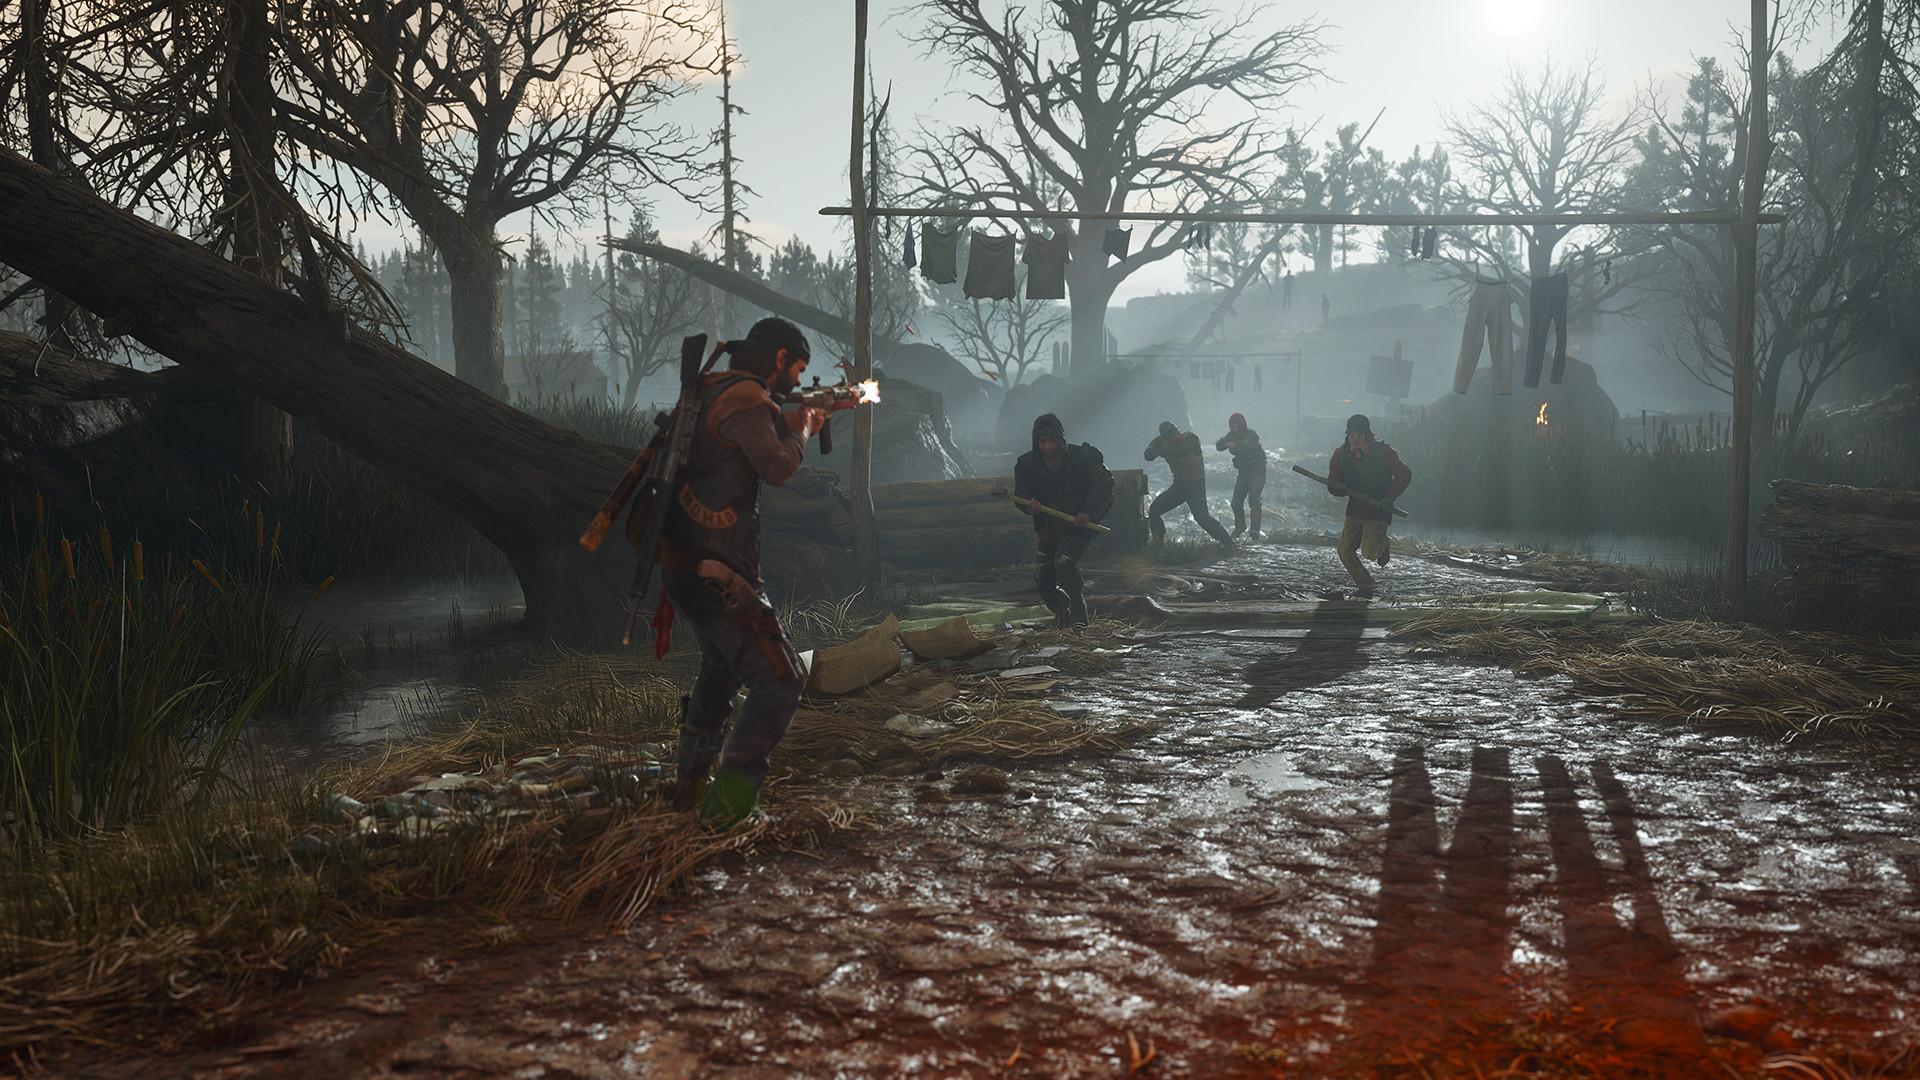 Screenshot №5 from game Days Gone